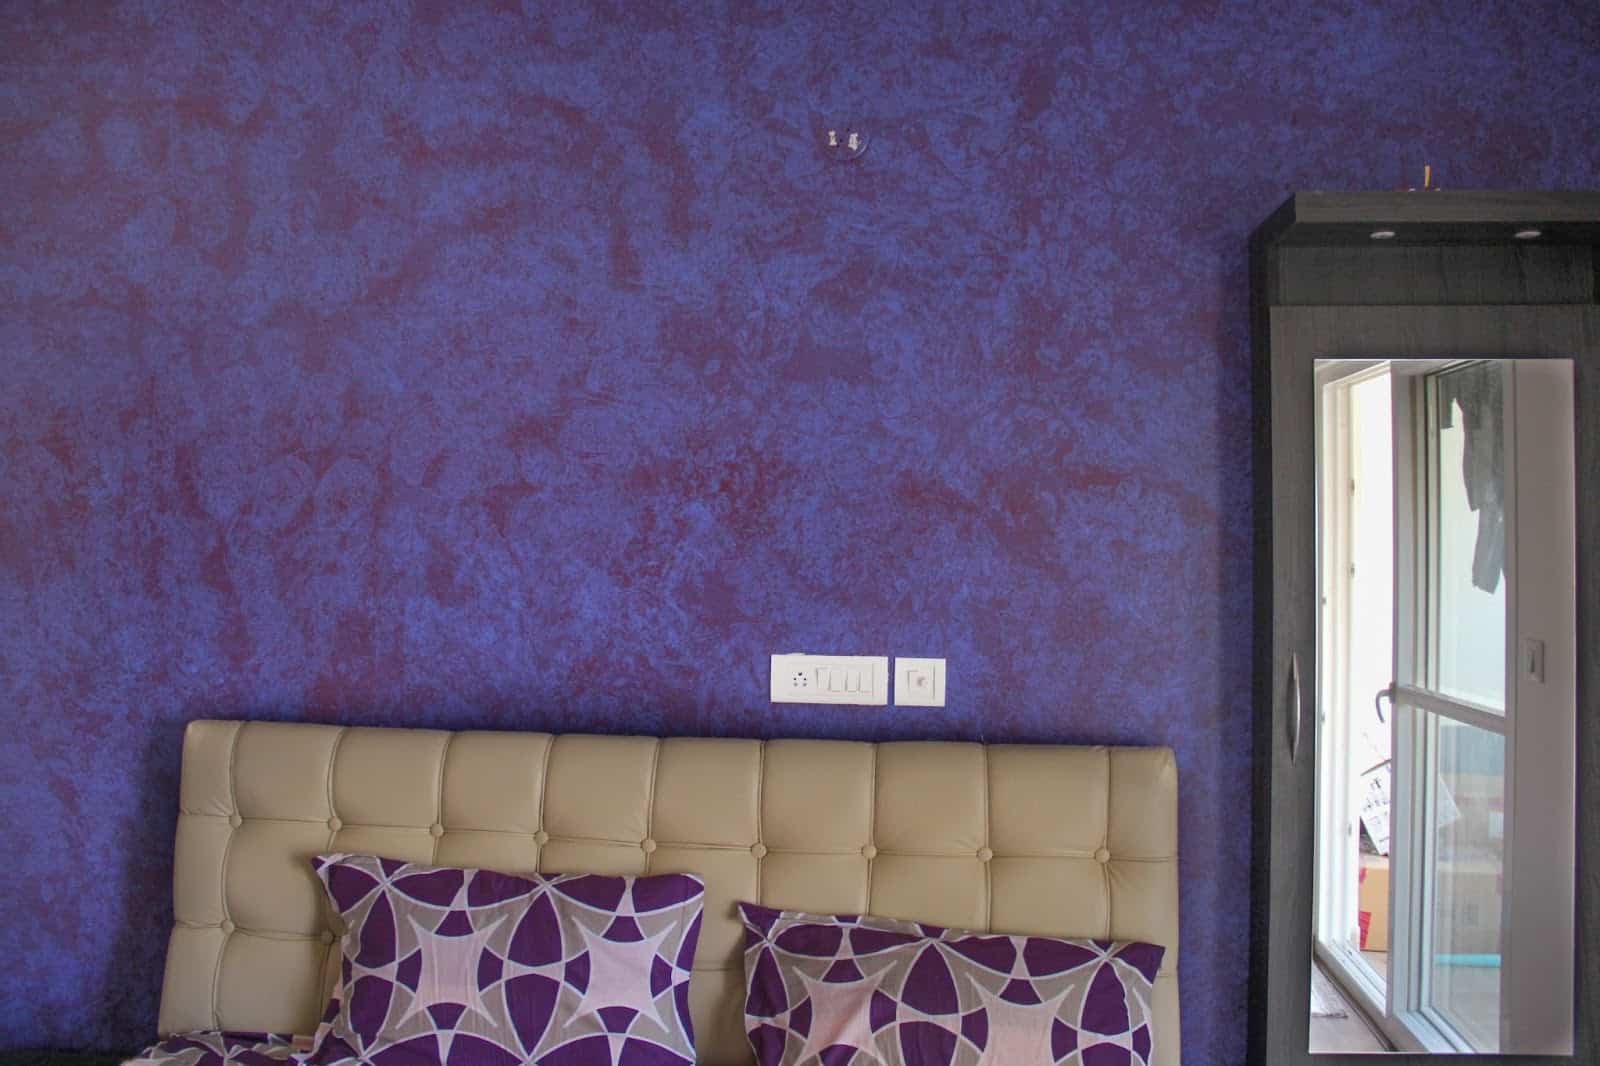 A PURPLE WALL WITH A DOOR AND BED.